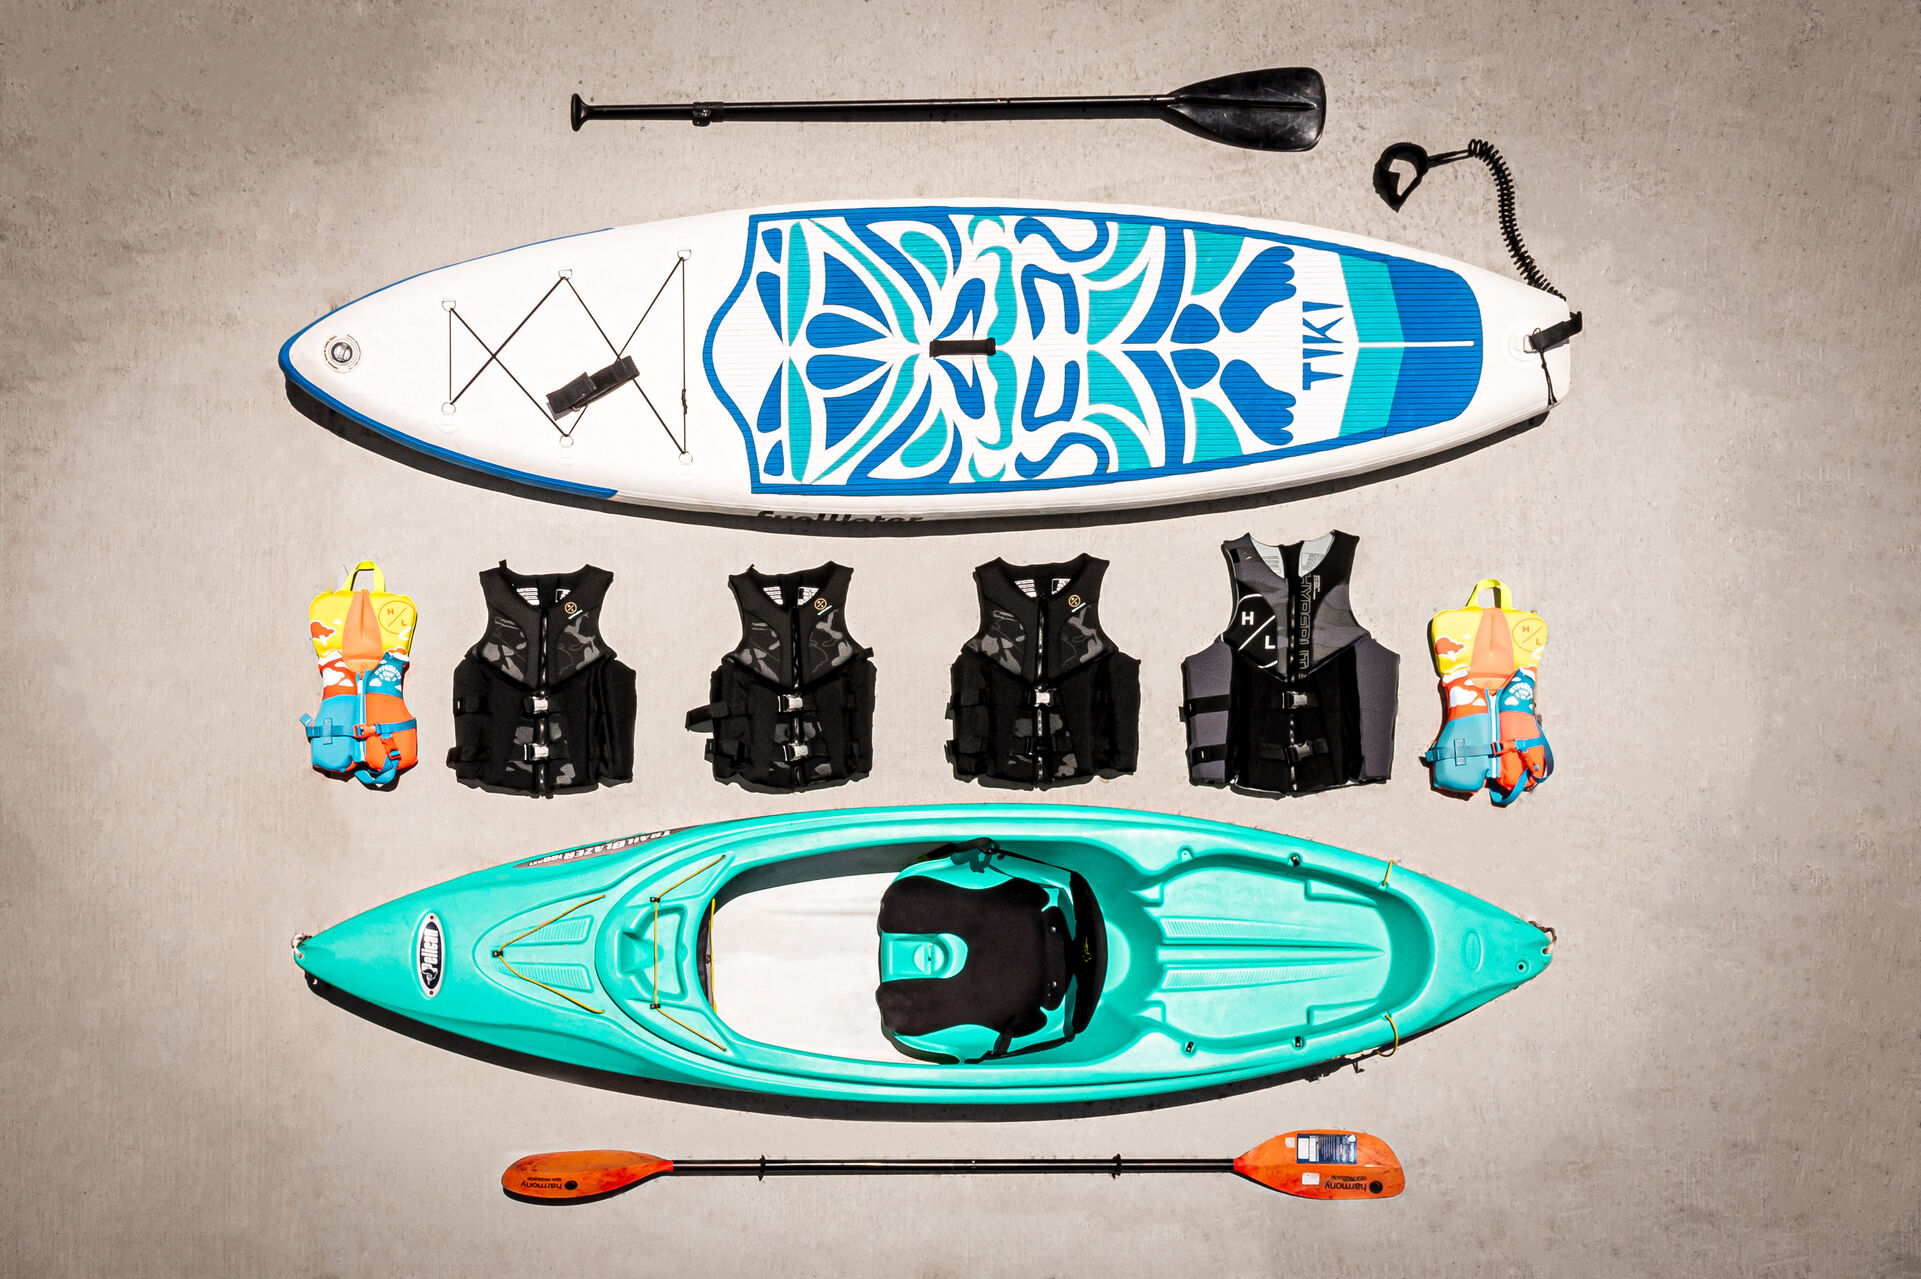 There are two blow-up, stand-up paddle boards, 1 kayak, 2 kids and 4 adult new life jackets